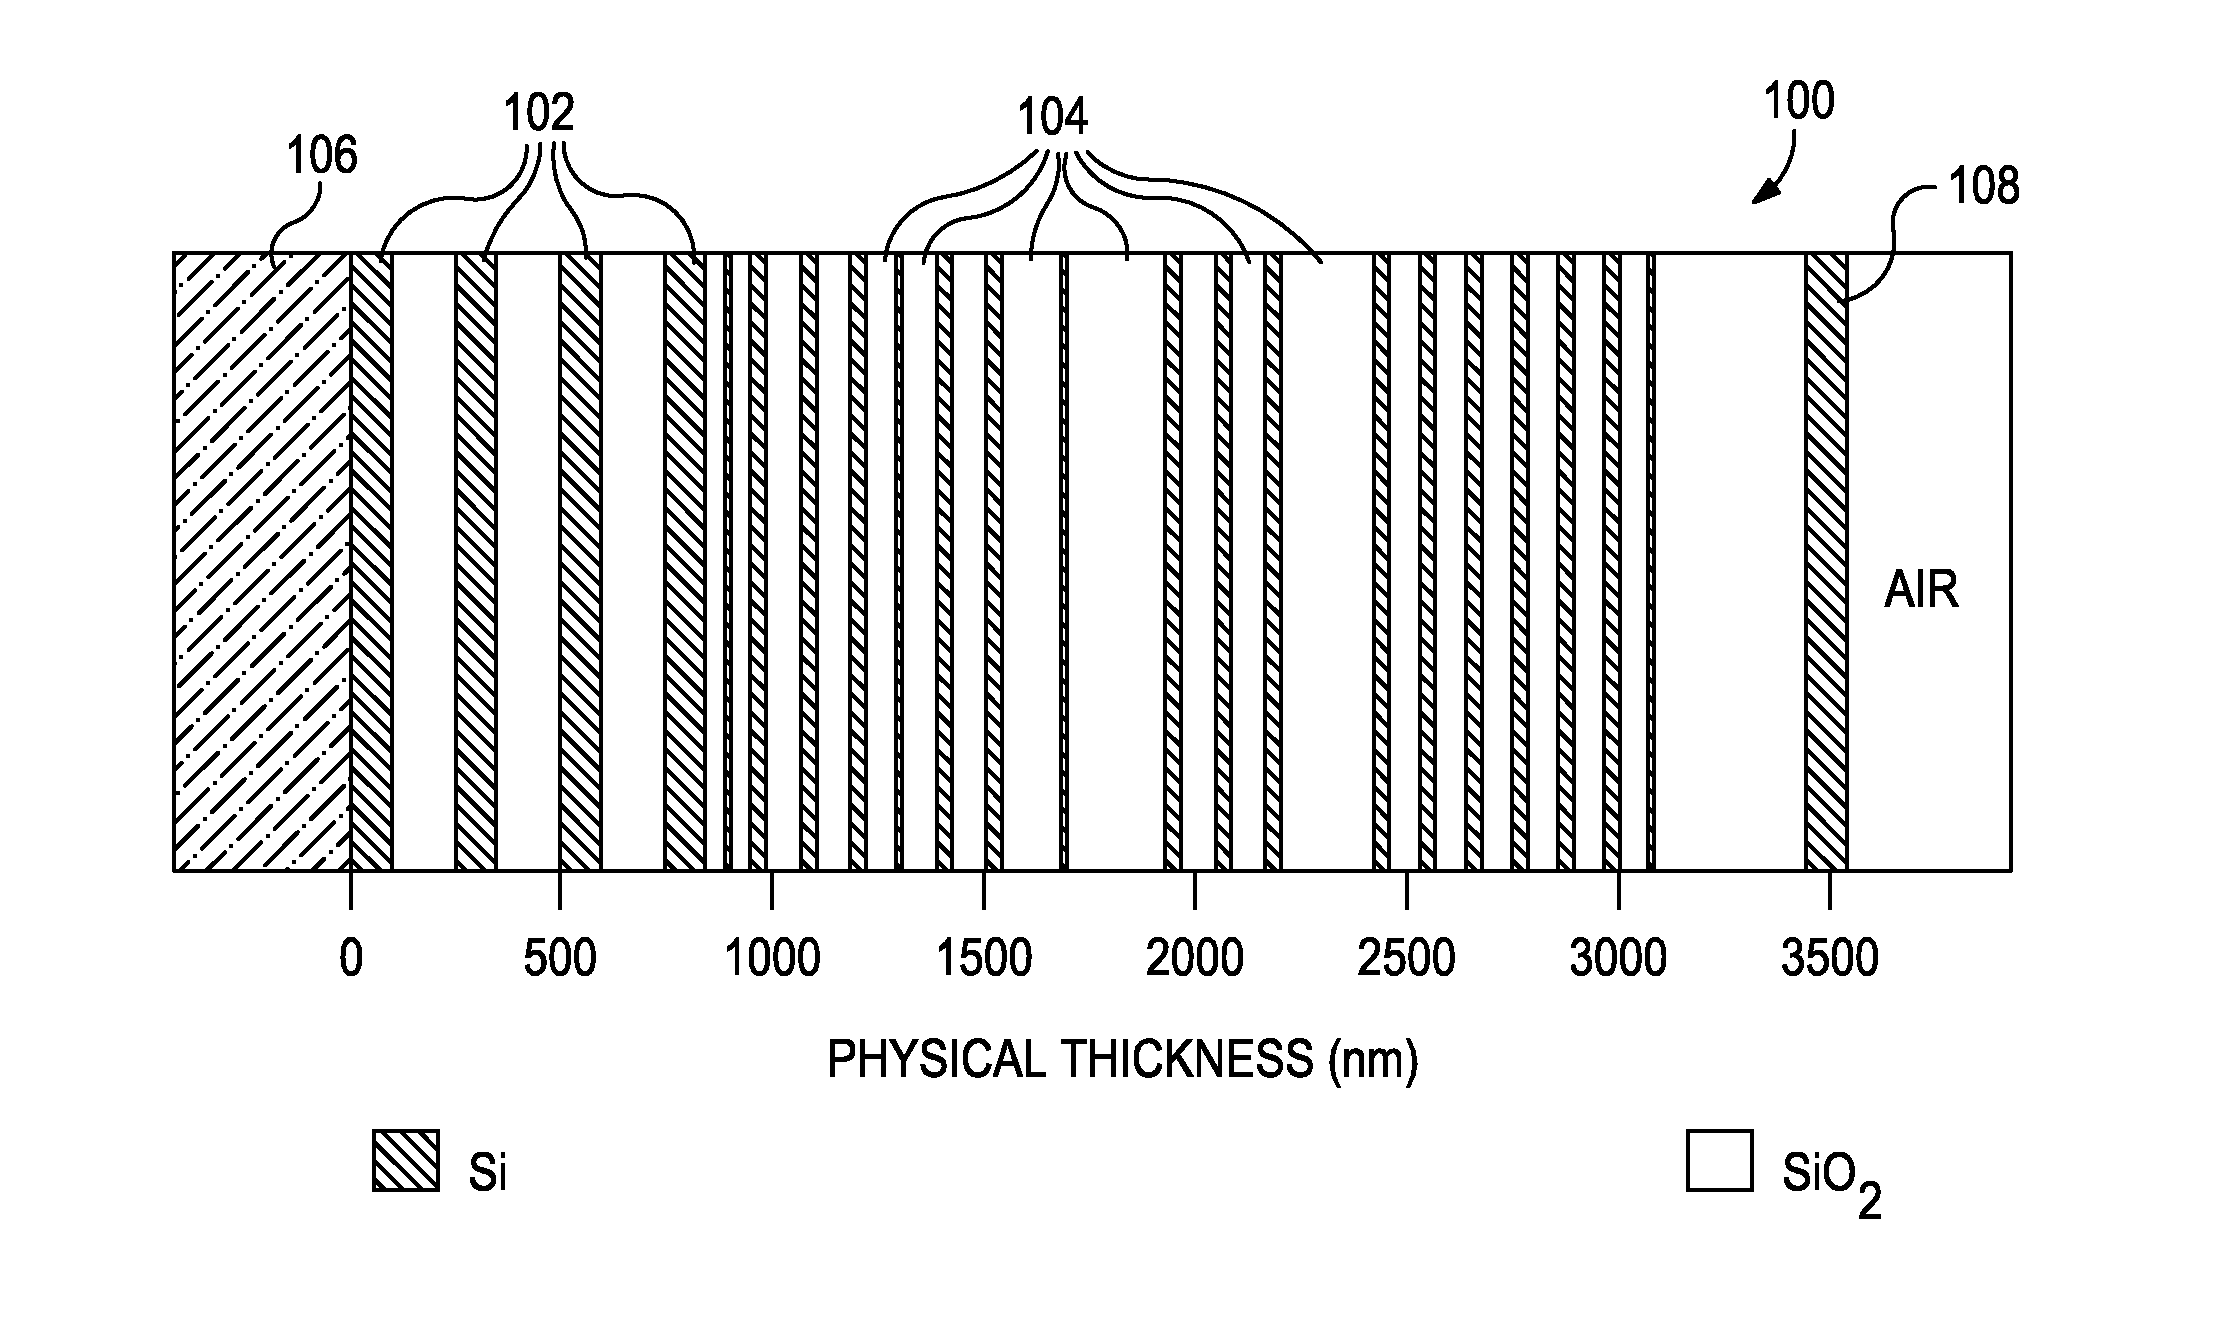 Systems and Methods of Monitoring a Multiphase Fluid